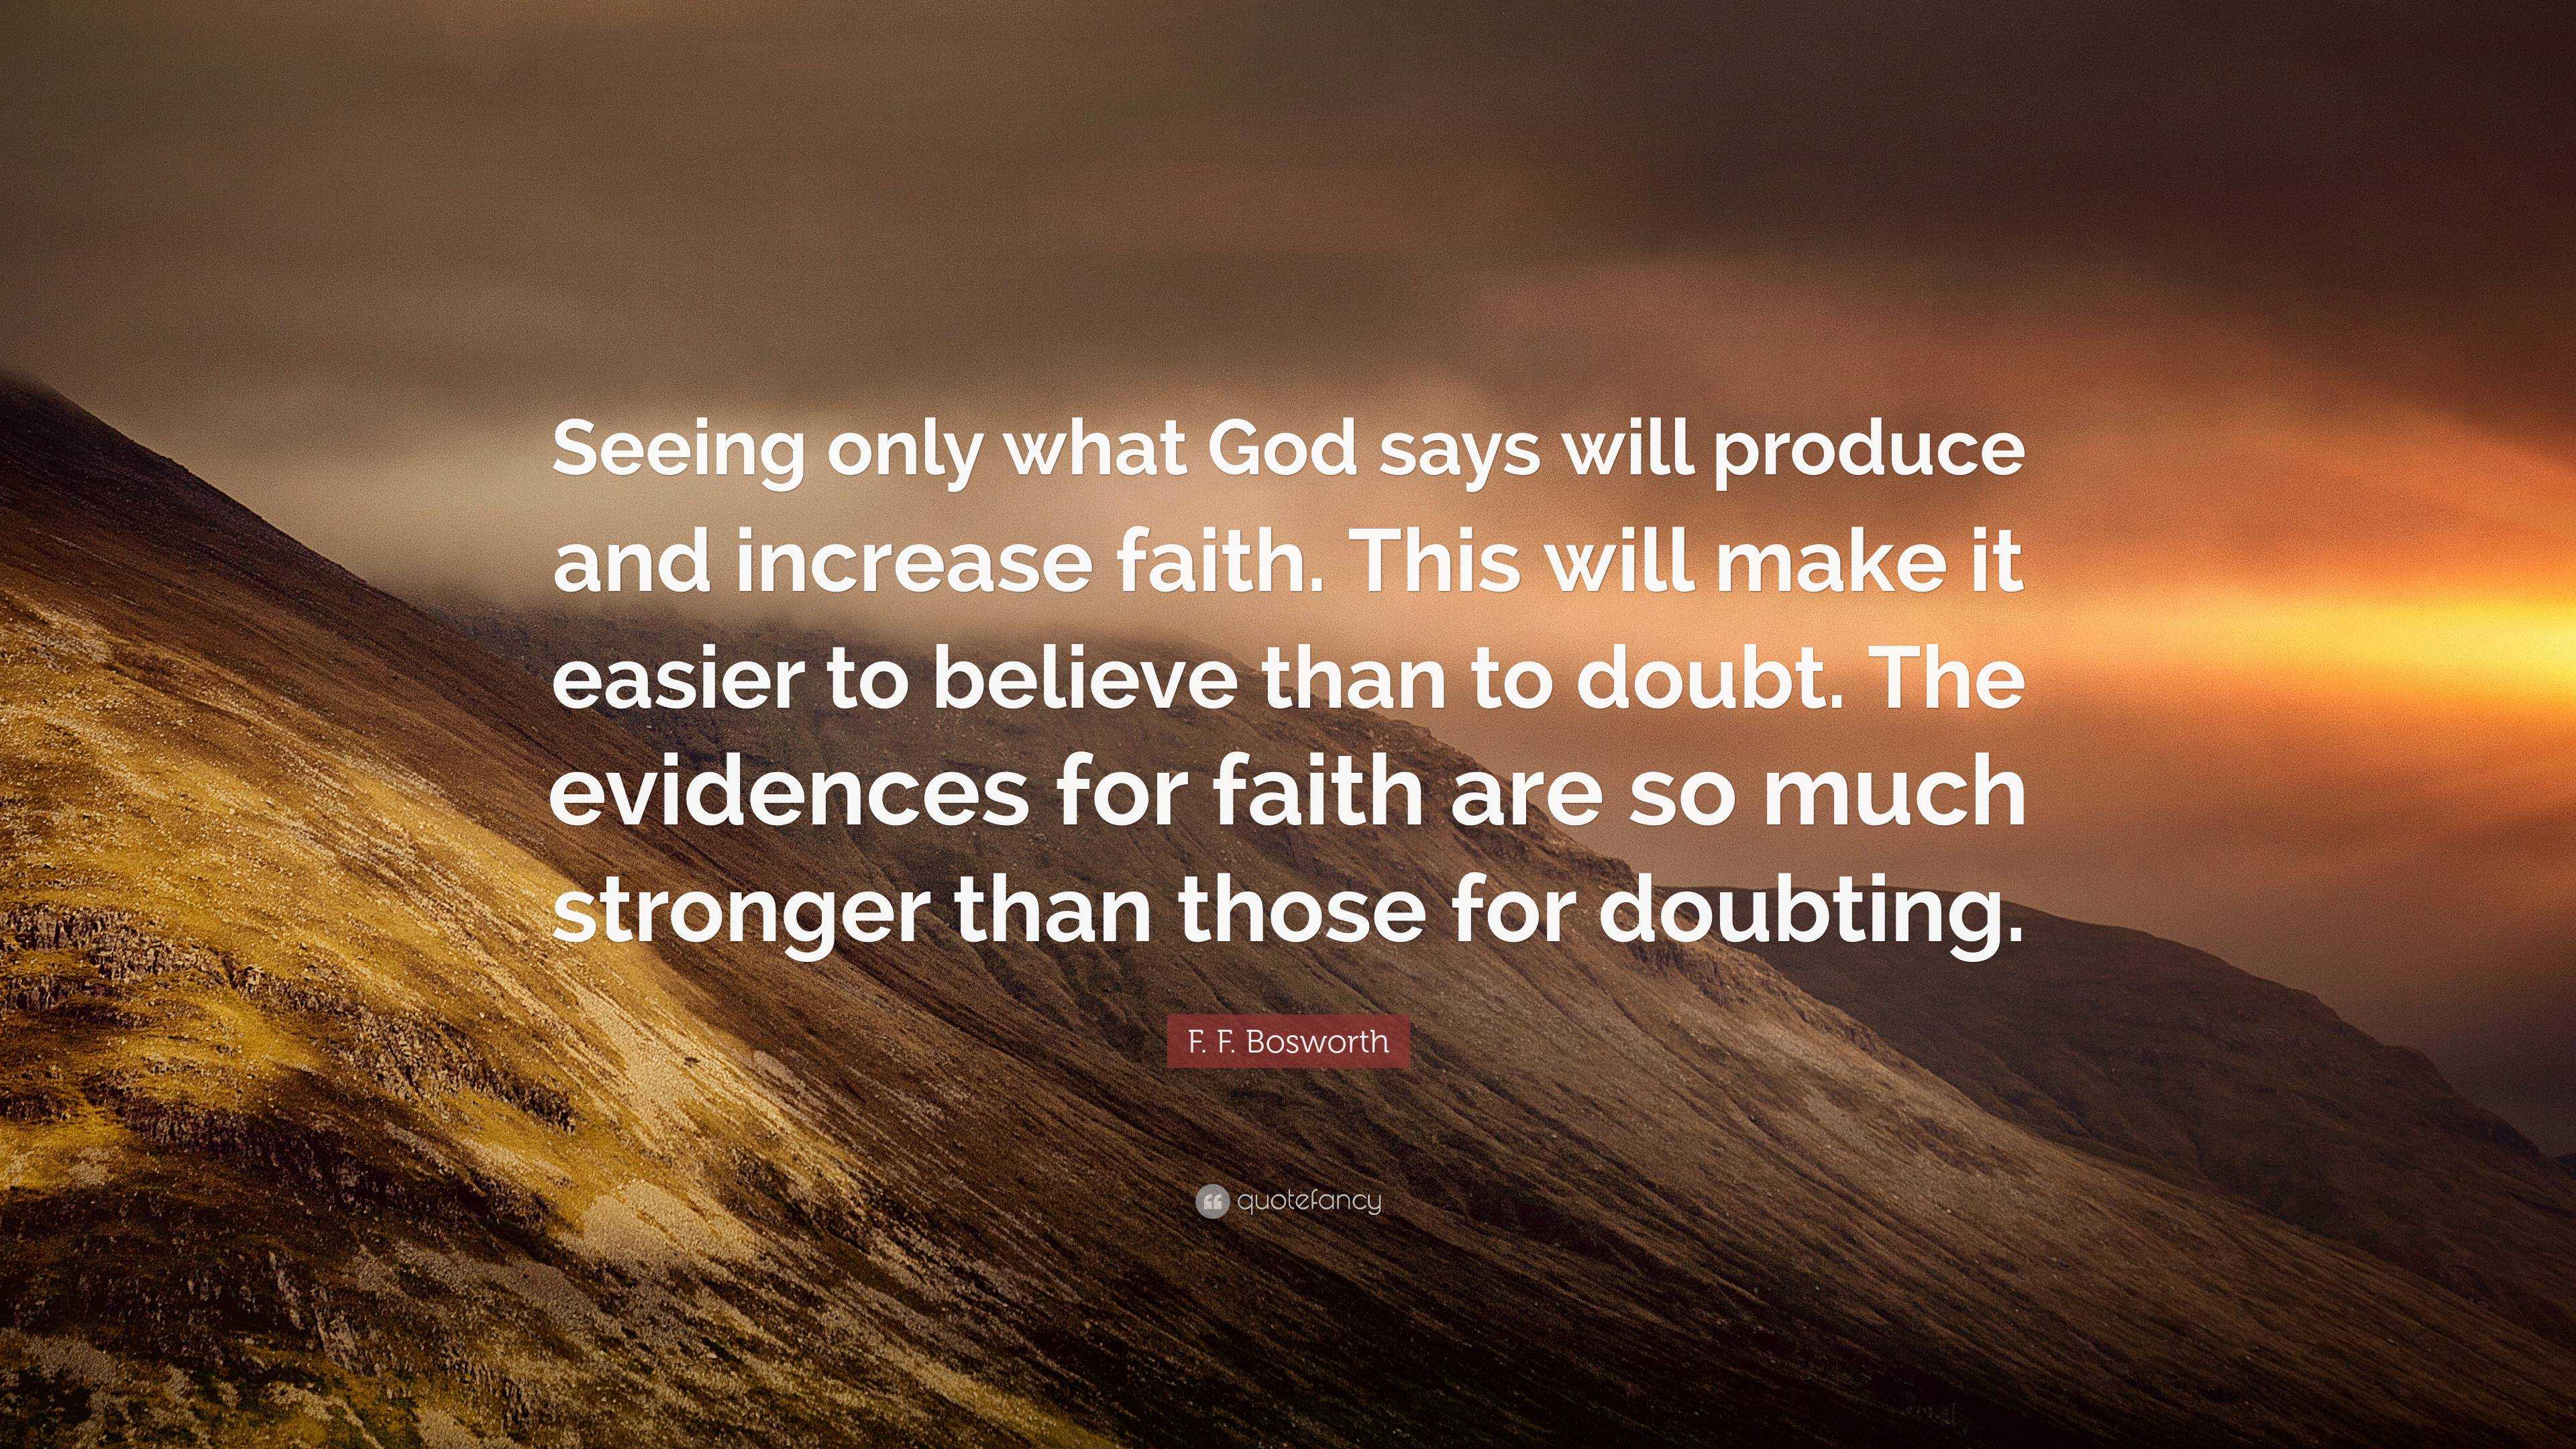 F. F. Bosworth Quote: “Seeing only what God says will produce and ...